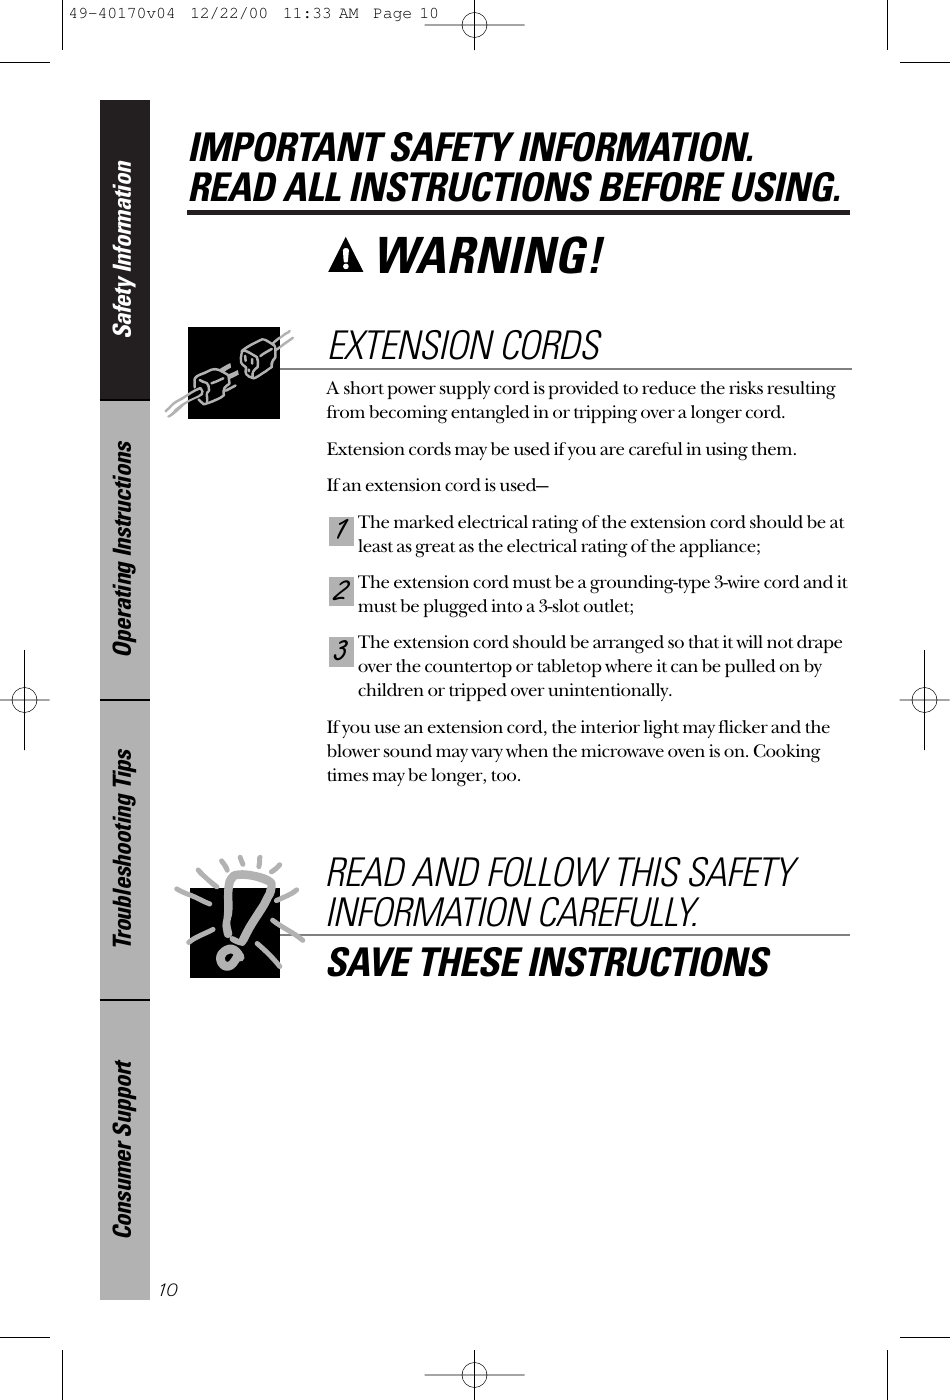 Safety InformationOperating InstructionsTroubleshooting TipsConsumer SupportIMPORTANT SAFETY INFORMATION.READ ALL INSTRUCTIONS BEFORE USING.10WARNING! A short power supply cord is provided to reduce the risks resultingfrom becoming entangled in or tripping over a longer cord.Extension cords may be used if you are careful in using them.If an extension cord is used—The marked electrical rating of the extension cord should be atleast as great as the electrical rating of the appliance;The extension cord must be a grounding-type 3-wire cord and itmust be plugged into a 3-slot outlet;The extension cord should be arranged so that it will not drapeover the countertop or tabletop where it can be pulled on bychildren or tripped over unintentionally.If you use an extension cord, the interior light may flicker and theblower sound may vary when the microwave oven is on. Cookingtimes may be longer, too.321EXTENSION CORDSREAD AND FOLLOW THIS SAFETYINFORMATION CAREFULLY.SAVE THESE INSTRUCTIONS49-40170v04  12/22/00  11:33 AM  Page 10